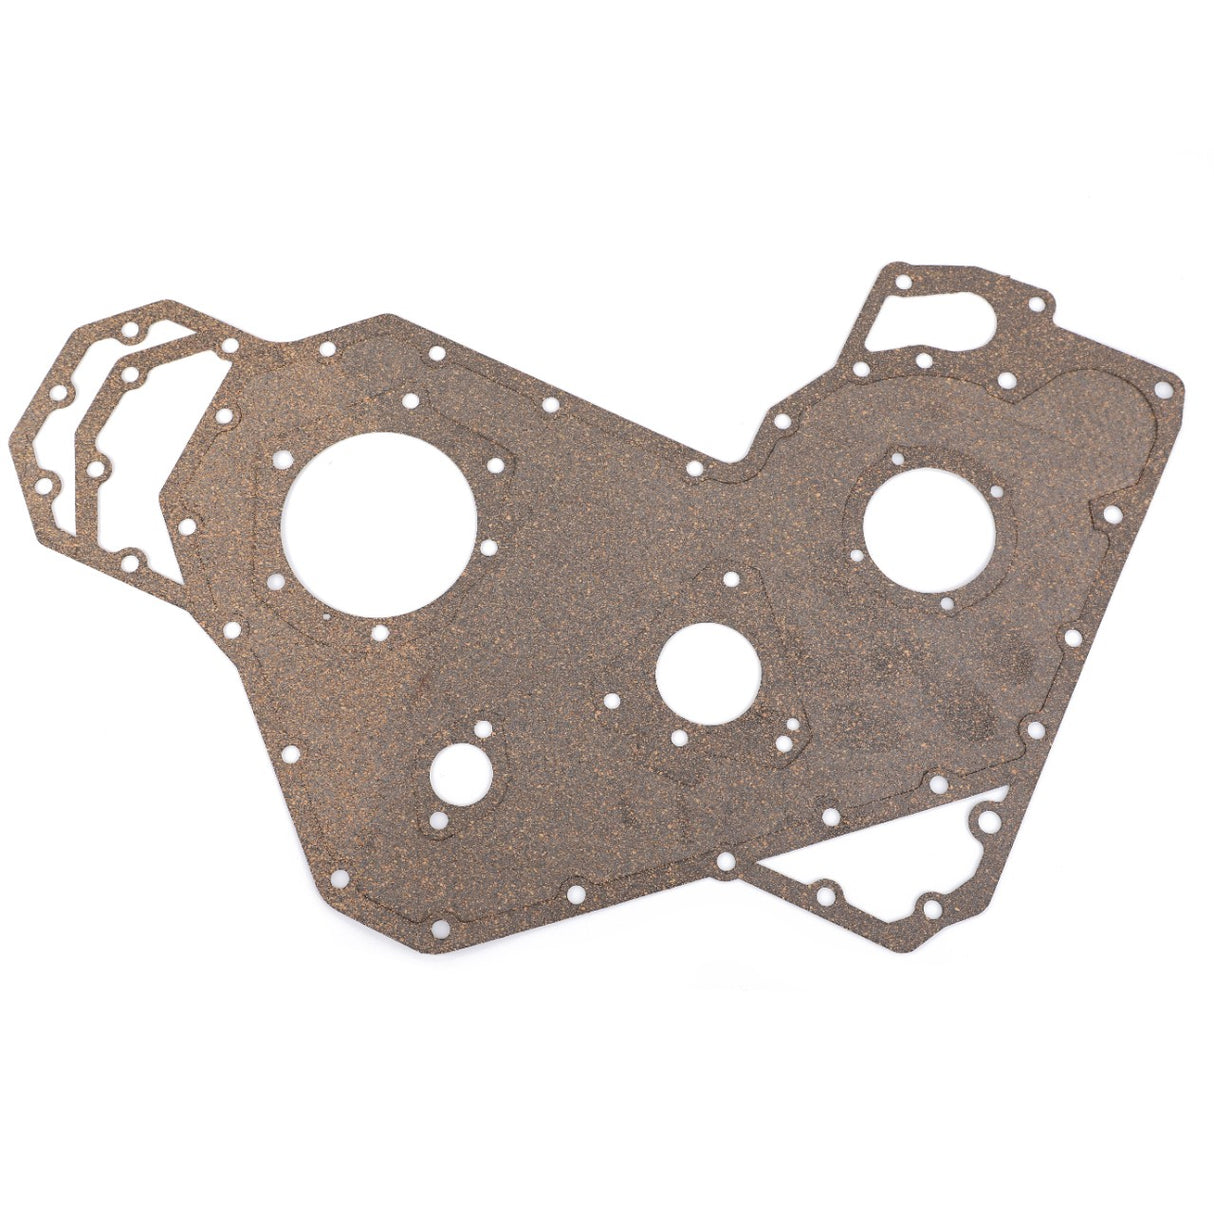 AGCO | Gasket Kit, Timing Cover - 4224612M1 - Farming Parts